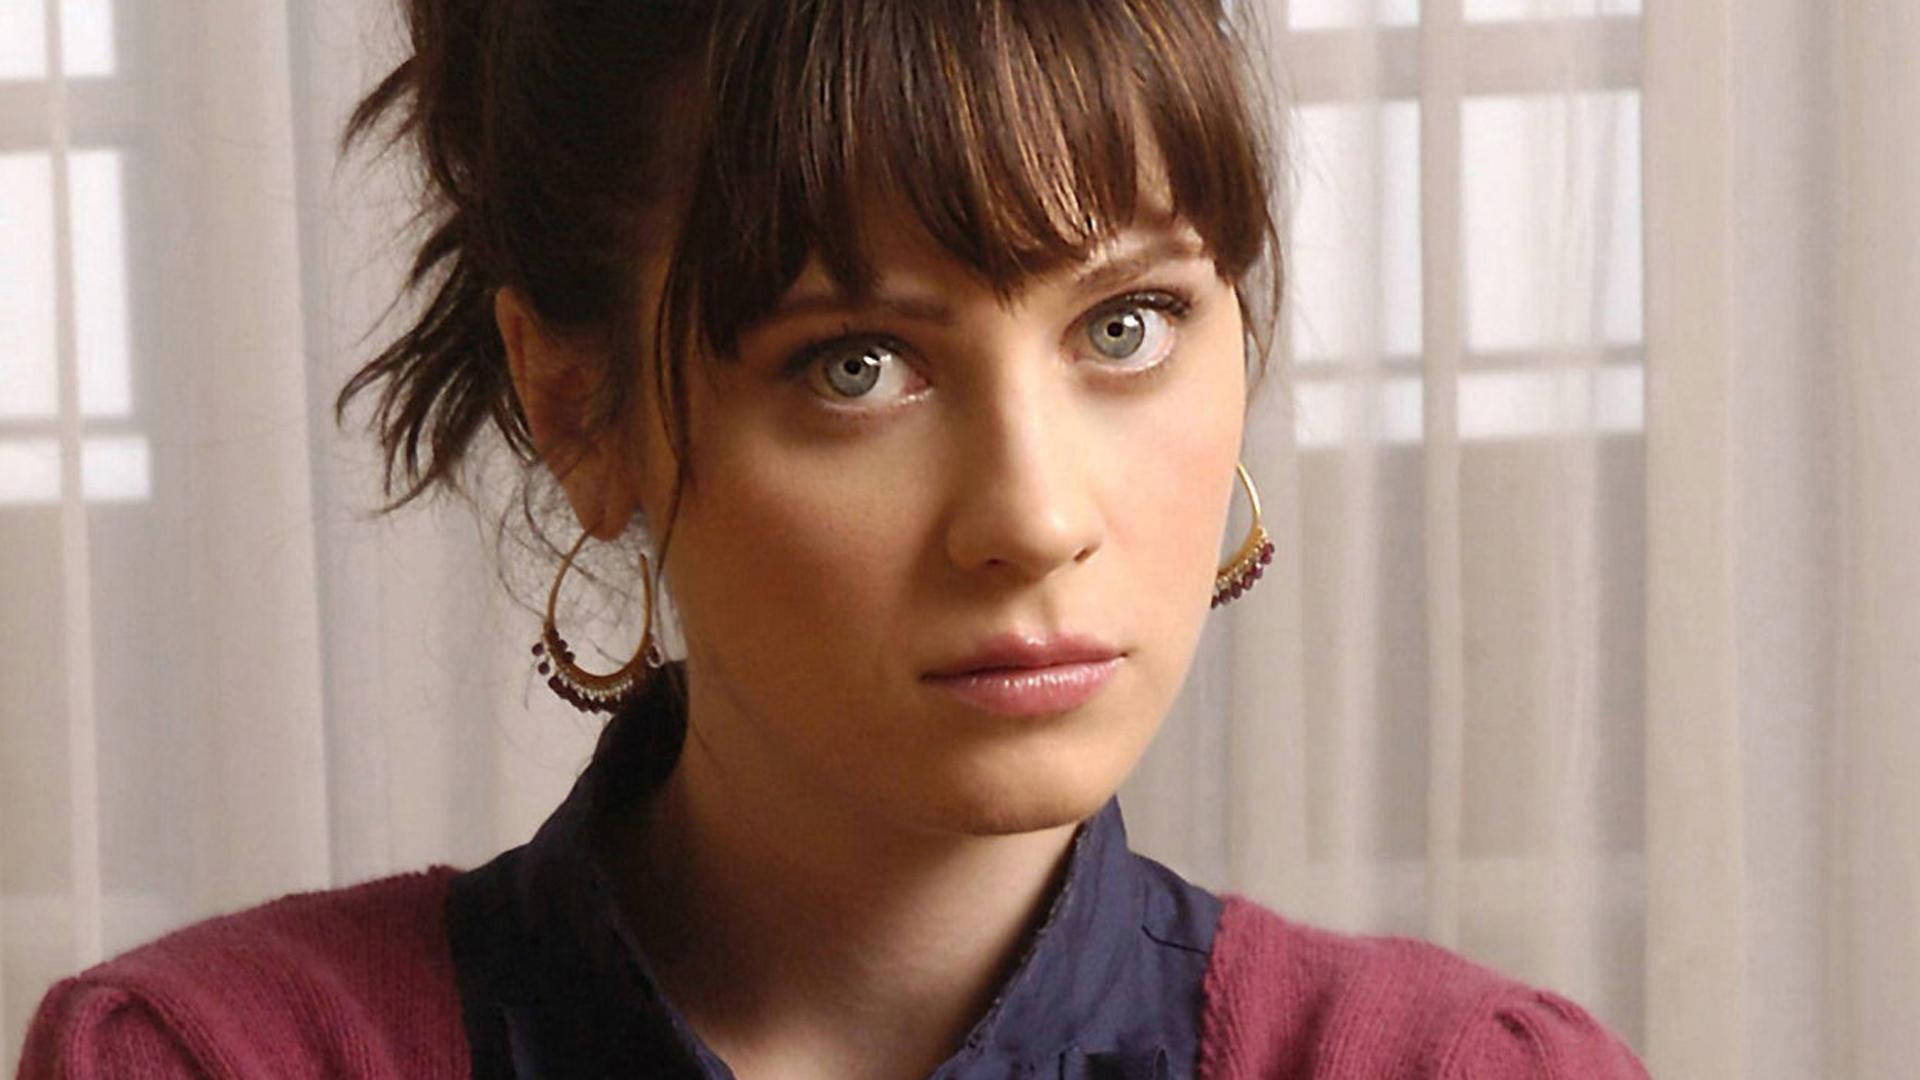 Zooey Deschanel With Hair Tied In Front Of Curtain